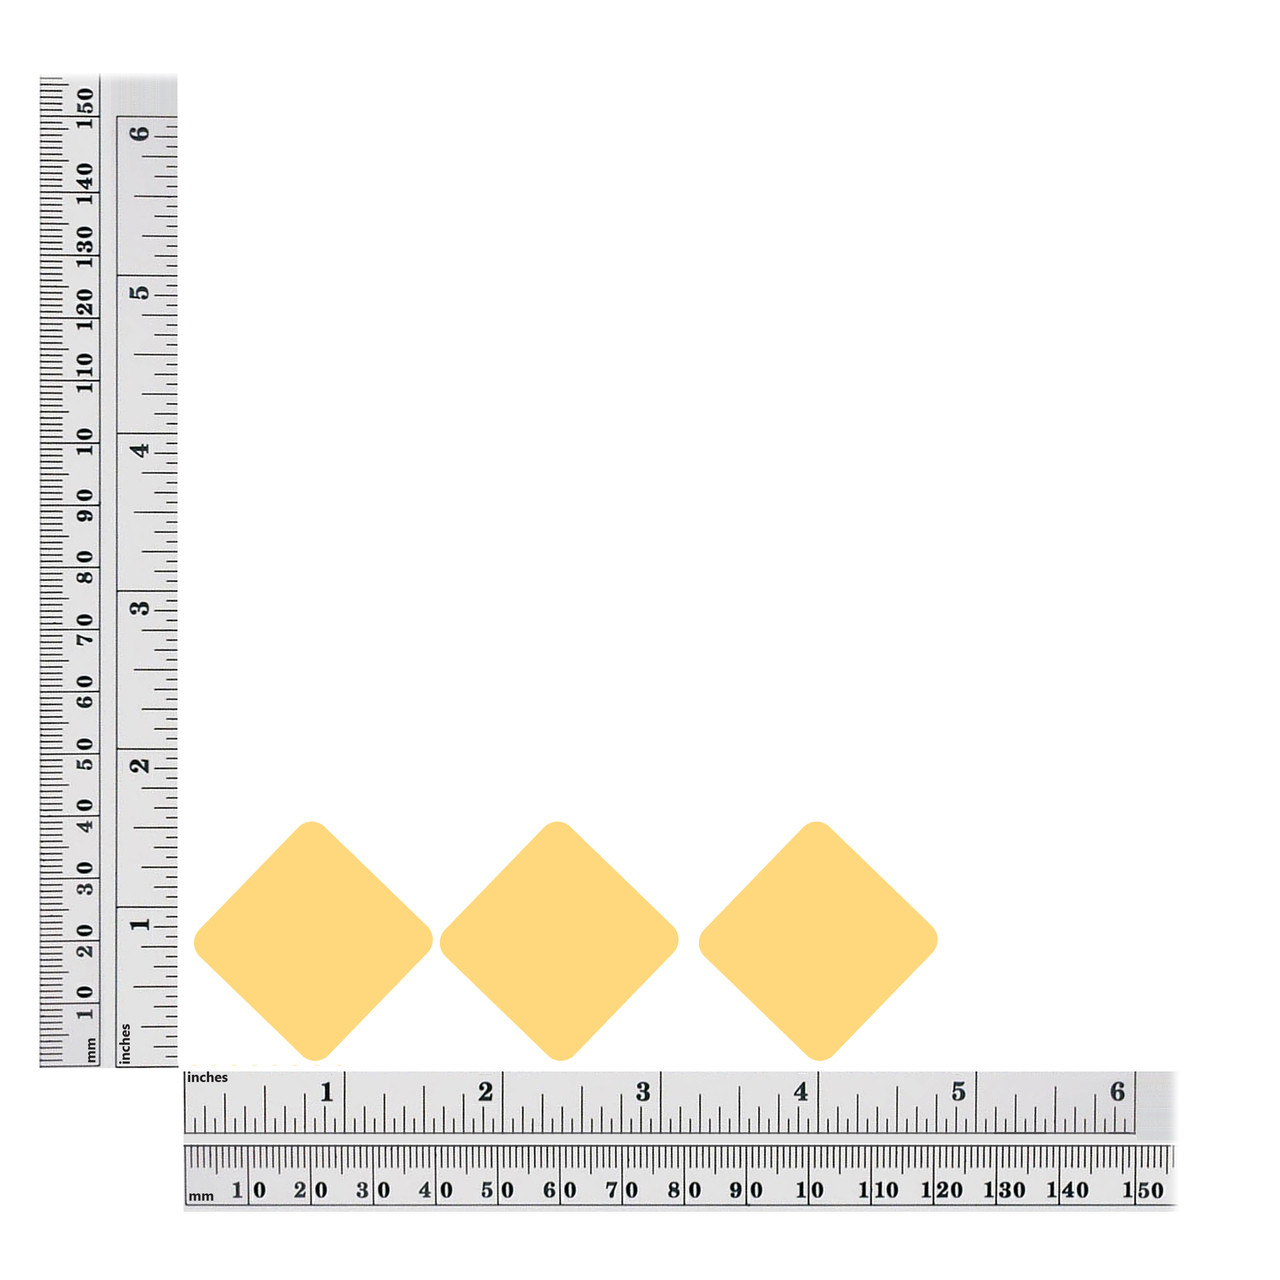 1-5-inch-diamond-sequins size chart